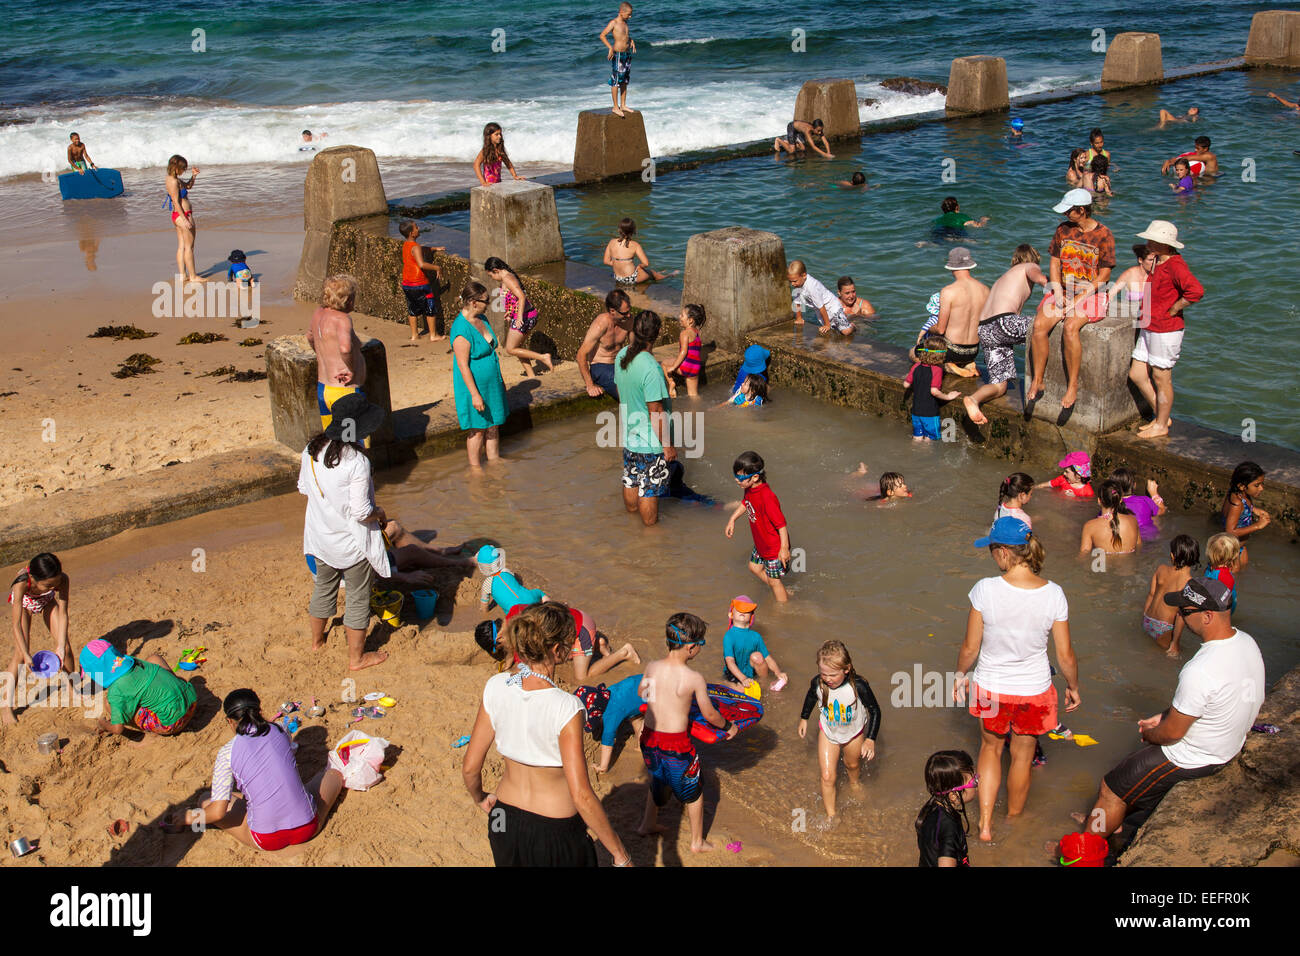 Children swimming in the Coogee Rockpool, Sydney, New South Wales, Australia Stock Photo